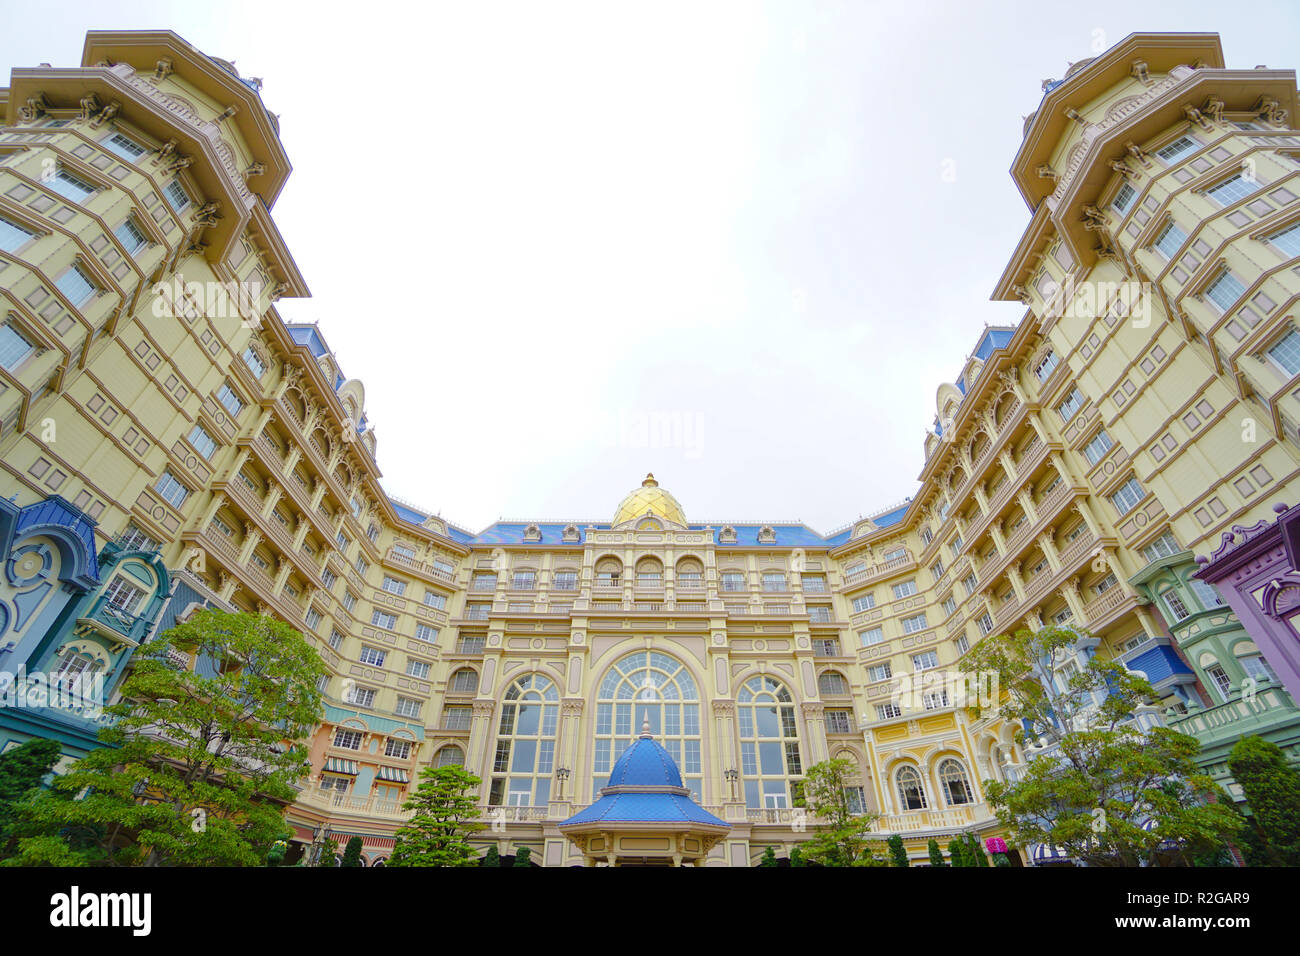 The Tokyo Disneyland Hotel located in front of the Tokyo Disneyland park with the Tokyo Disneyland station of the Disney Resort Line monorail system i Stock Photo